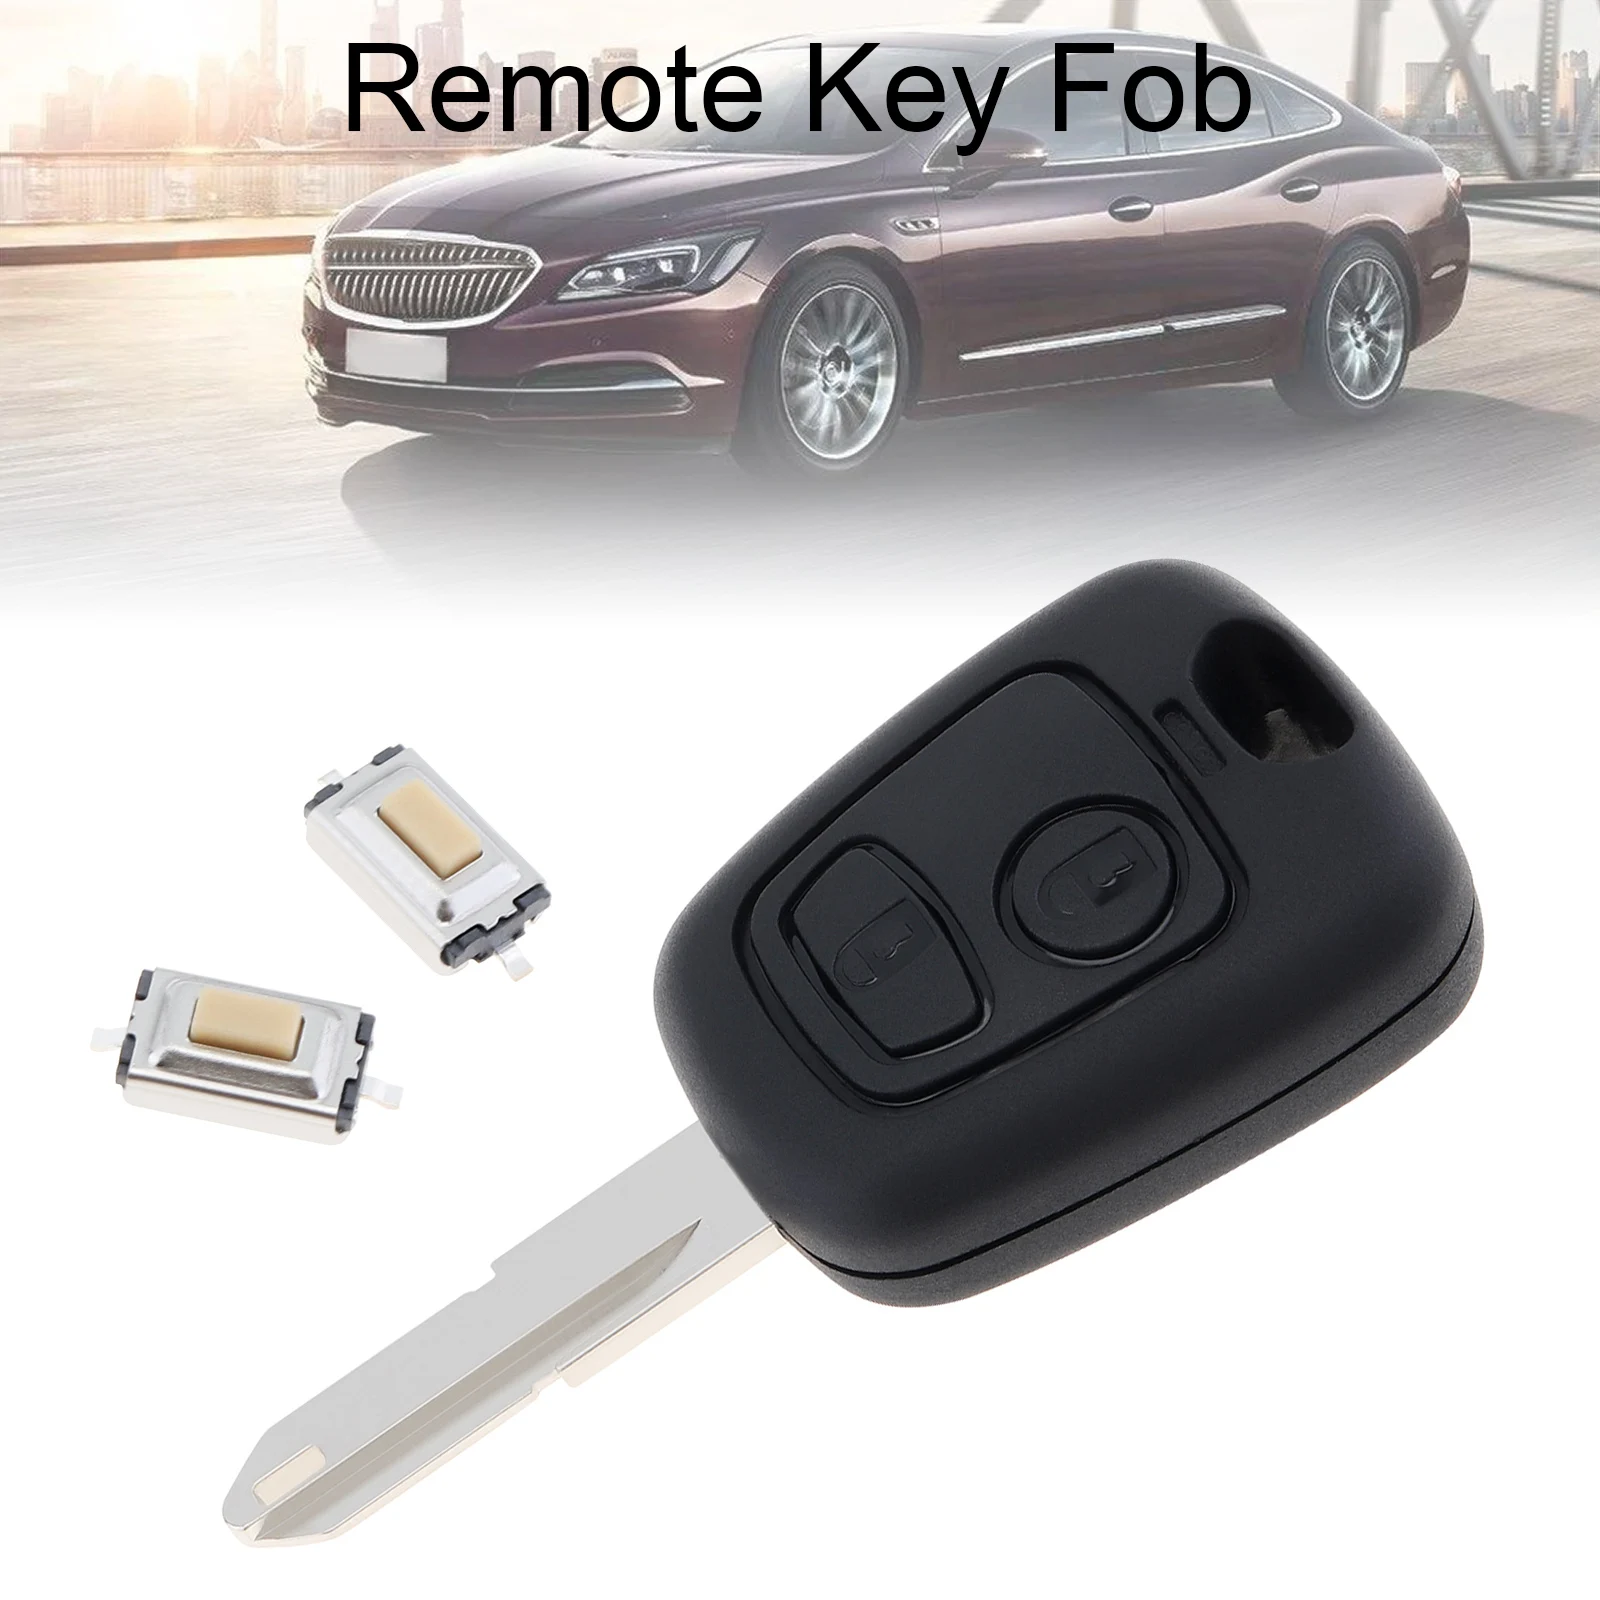 2 Buttons Car Remote Key Shell with 307/206 Blade for Citroen C1 / C2 / C3 / C4 / XSARA Picasso / Peug eot 307 / 107 / 207 / 407 2 buttons car remote key shell key housing fit for citroen c1 c2 c3 c4 xsara picasso with 307 blade